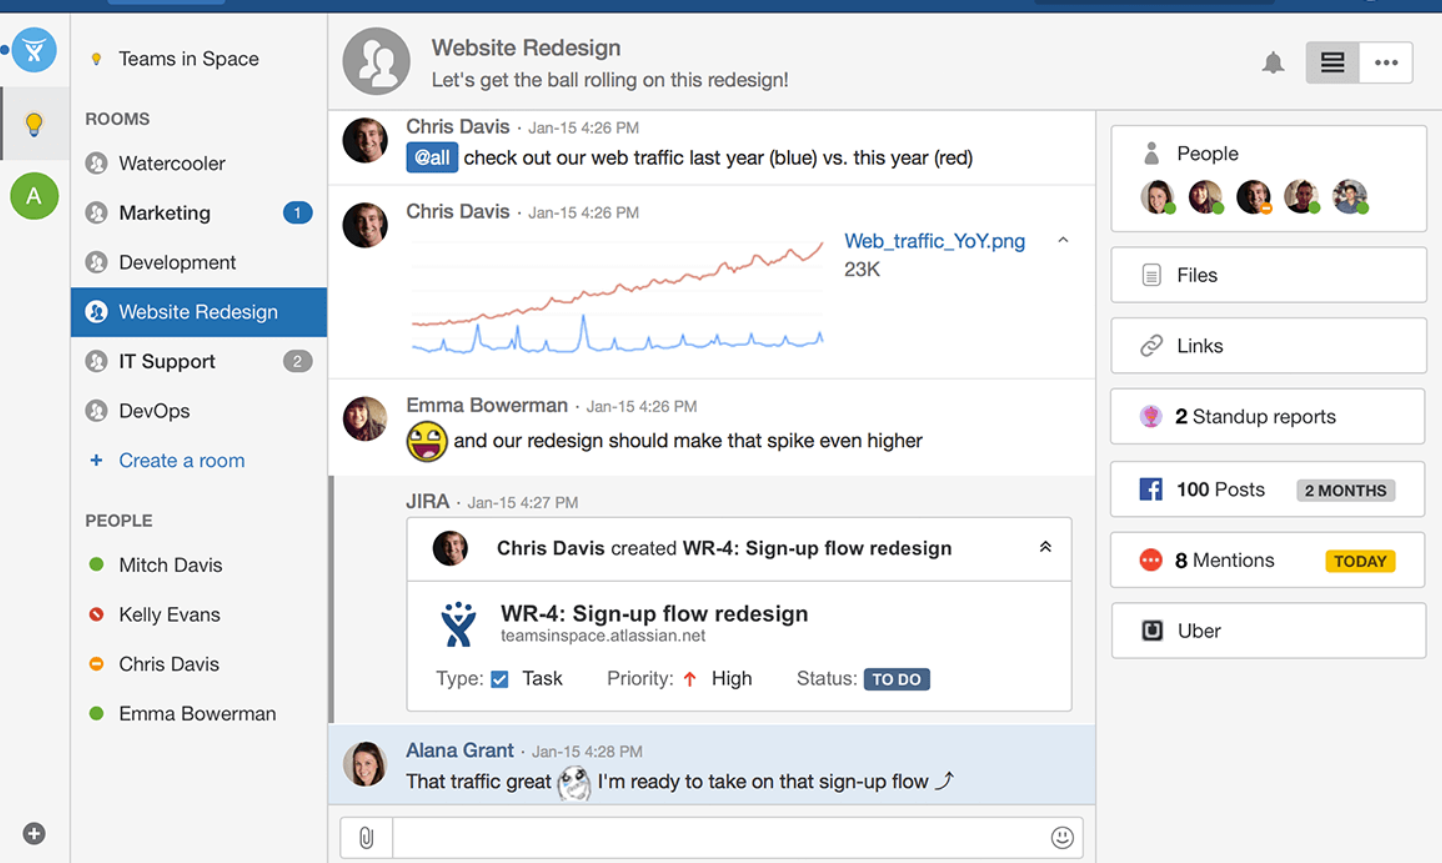 Find detailed information about HipChat